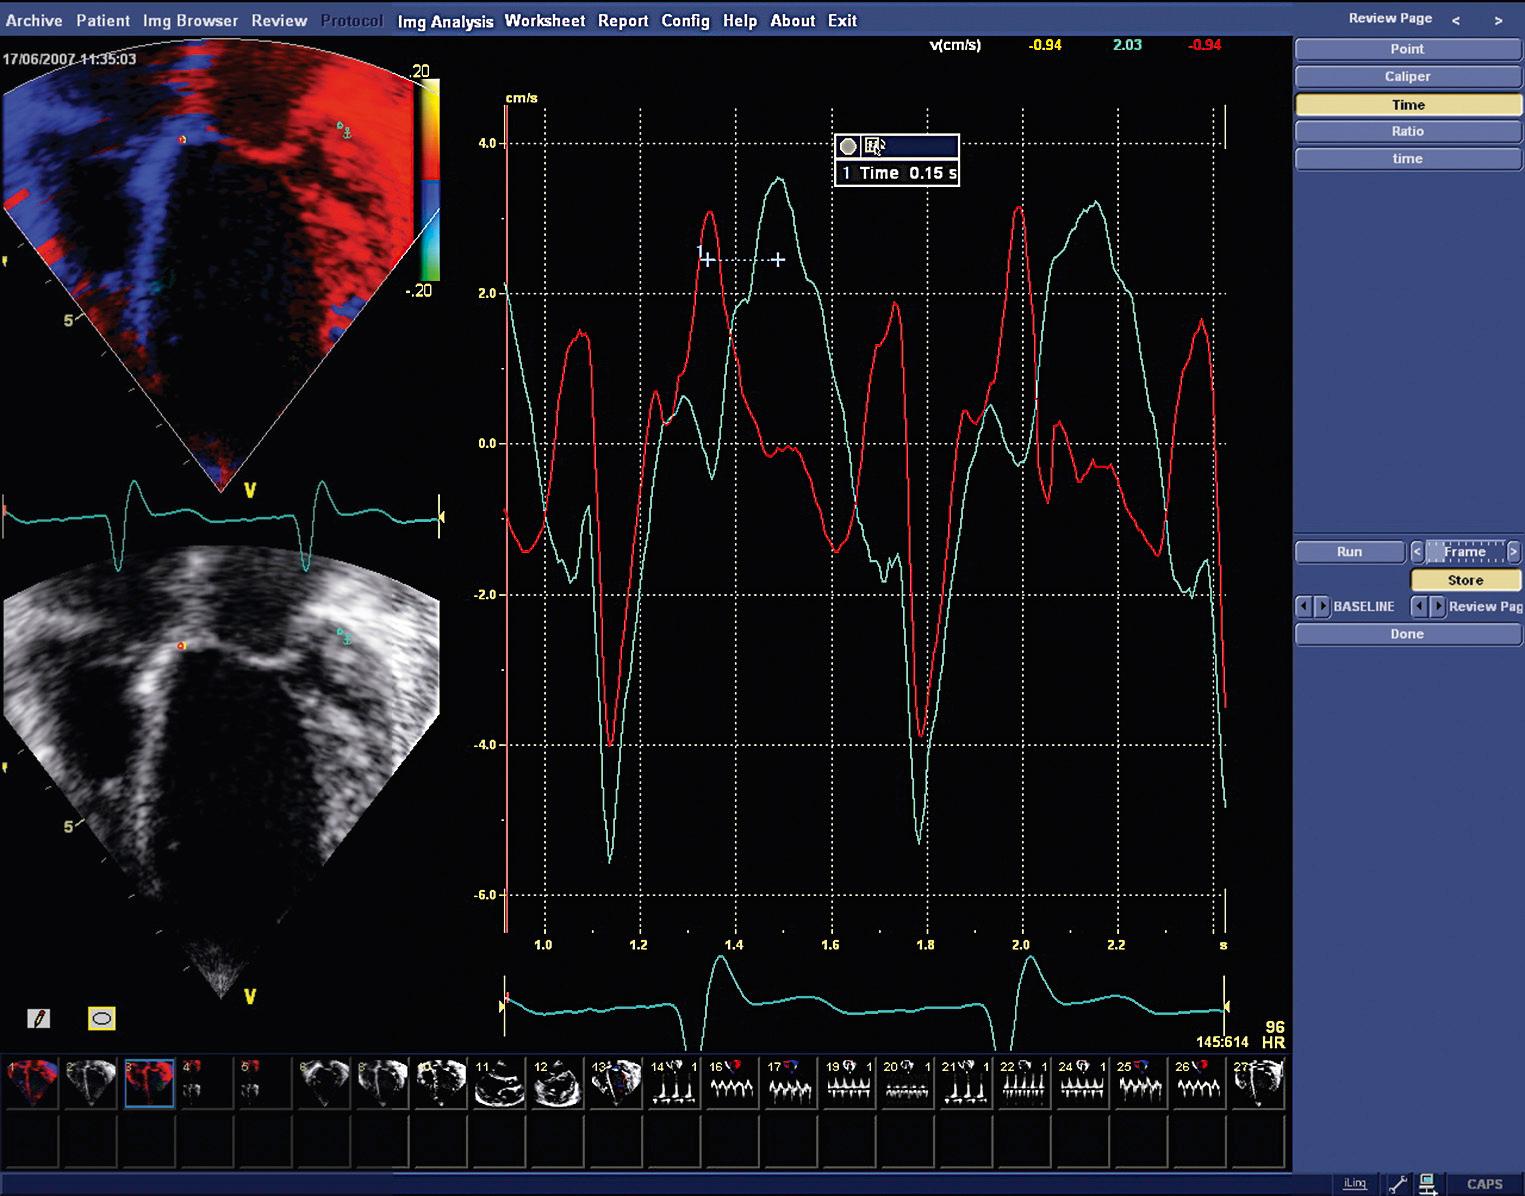 Fig. 65.4, Dyssynchrony of left ventricular function, demonstrated with tissue Doppler imaging. The time to the peak of inward movement of the lateral part of the annulus occurs 150 ms after the peak inward movement of the central fibrous body.